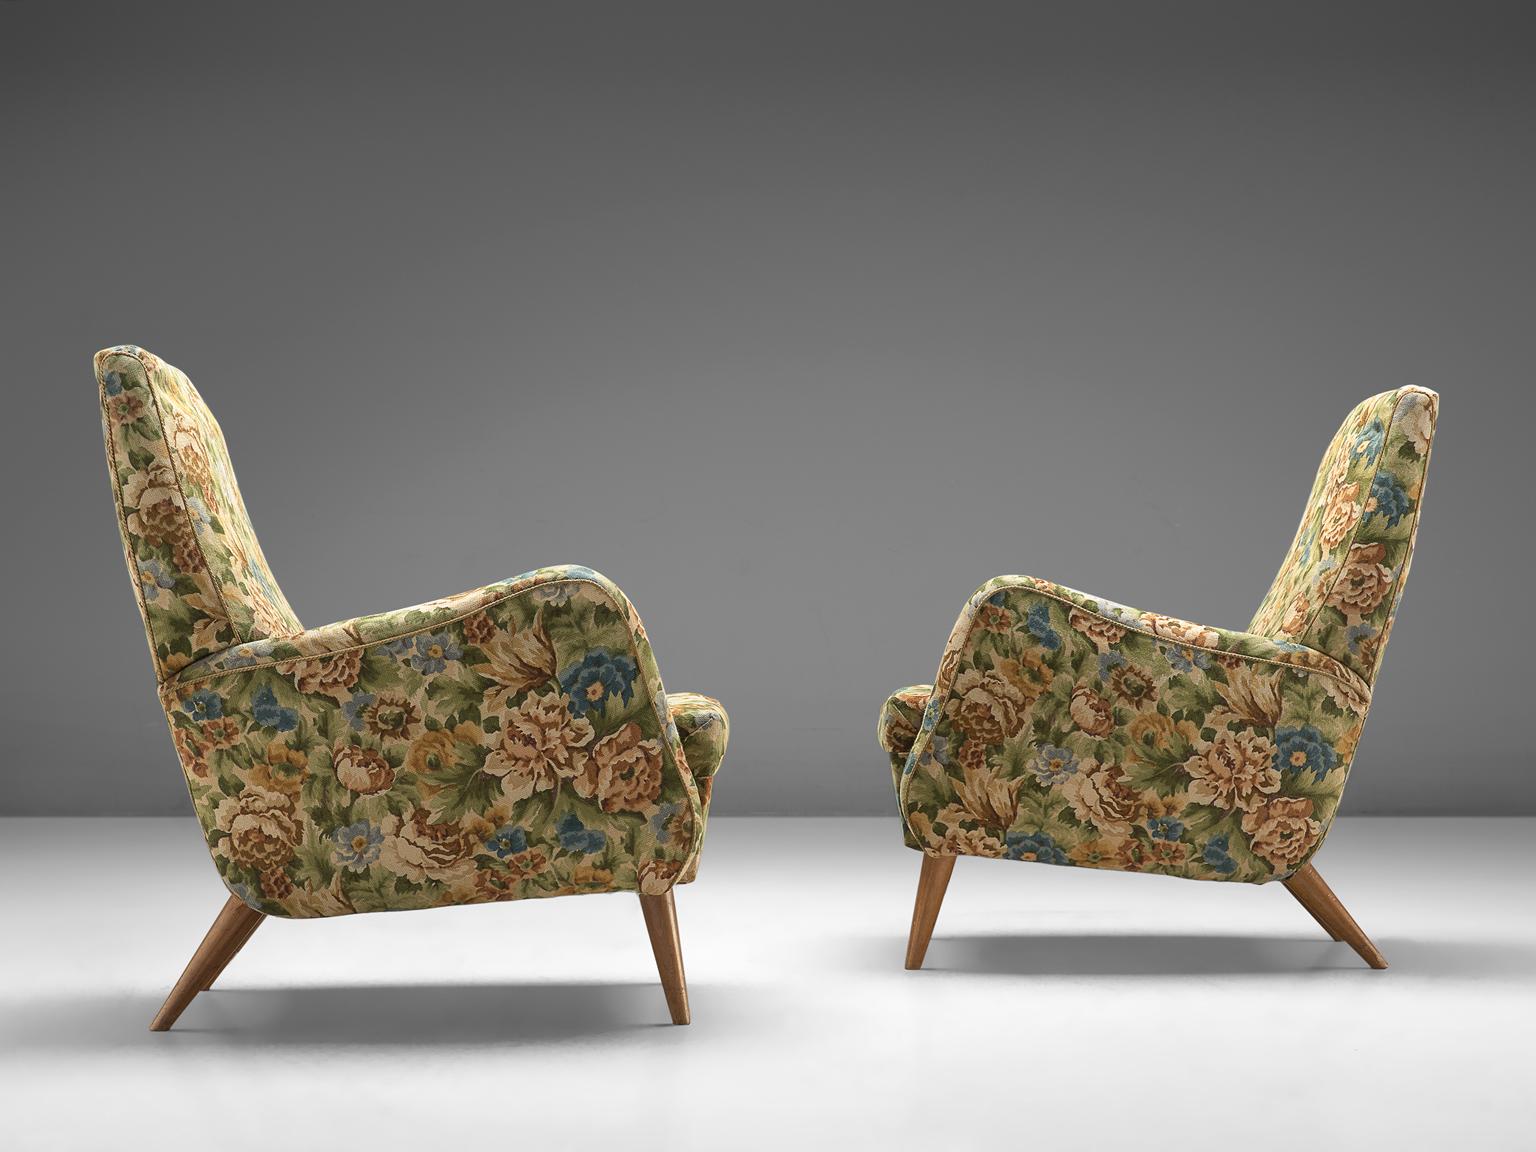 Mid-20th Century Italian Pair of Lounge Chairs in Original Floral Upholstery